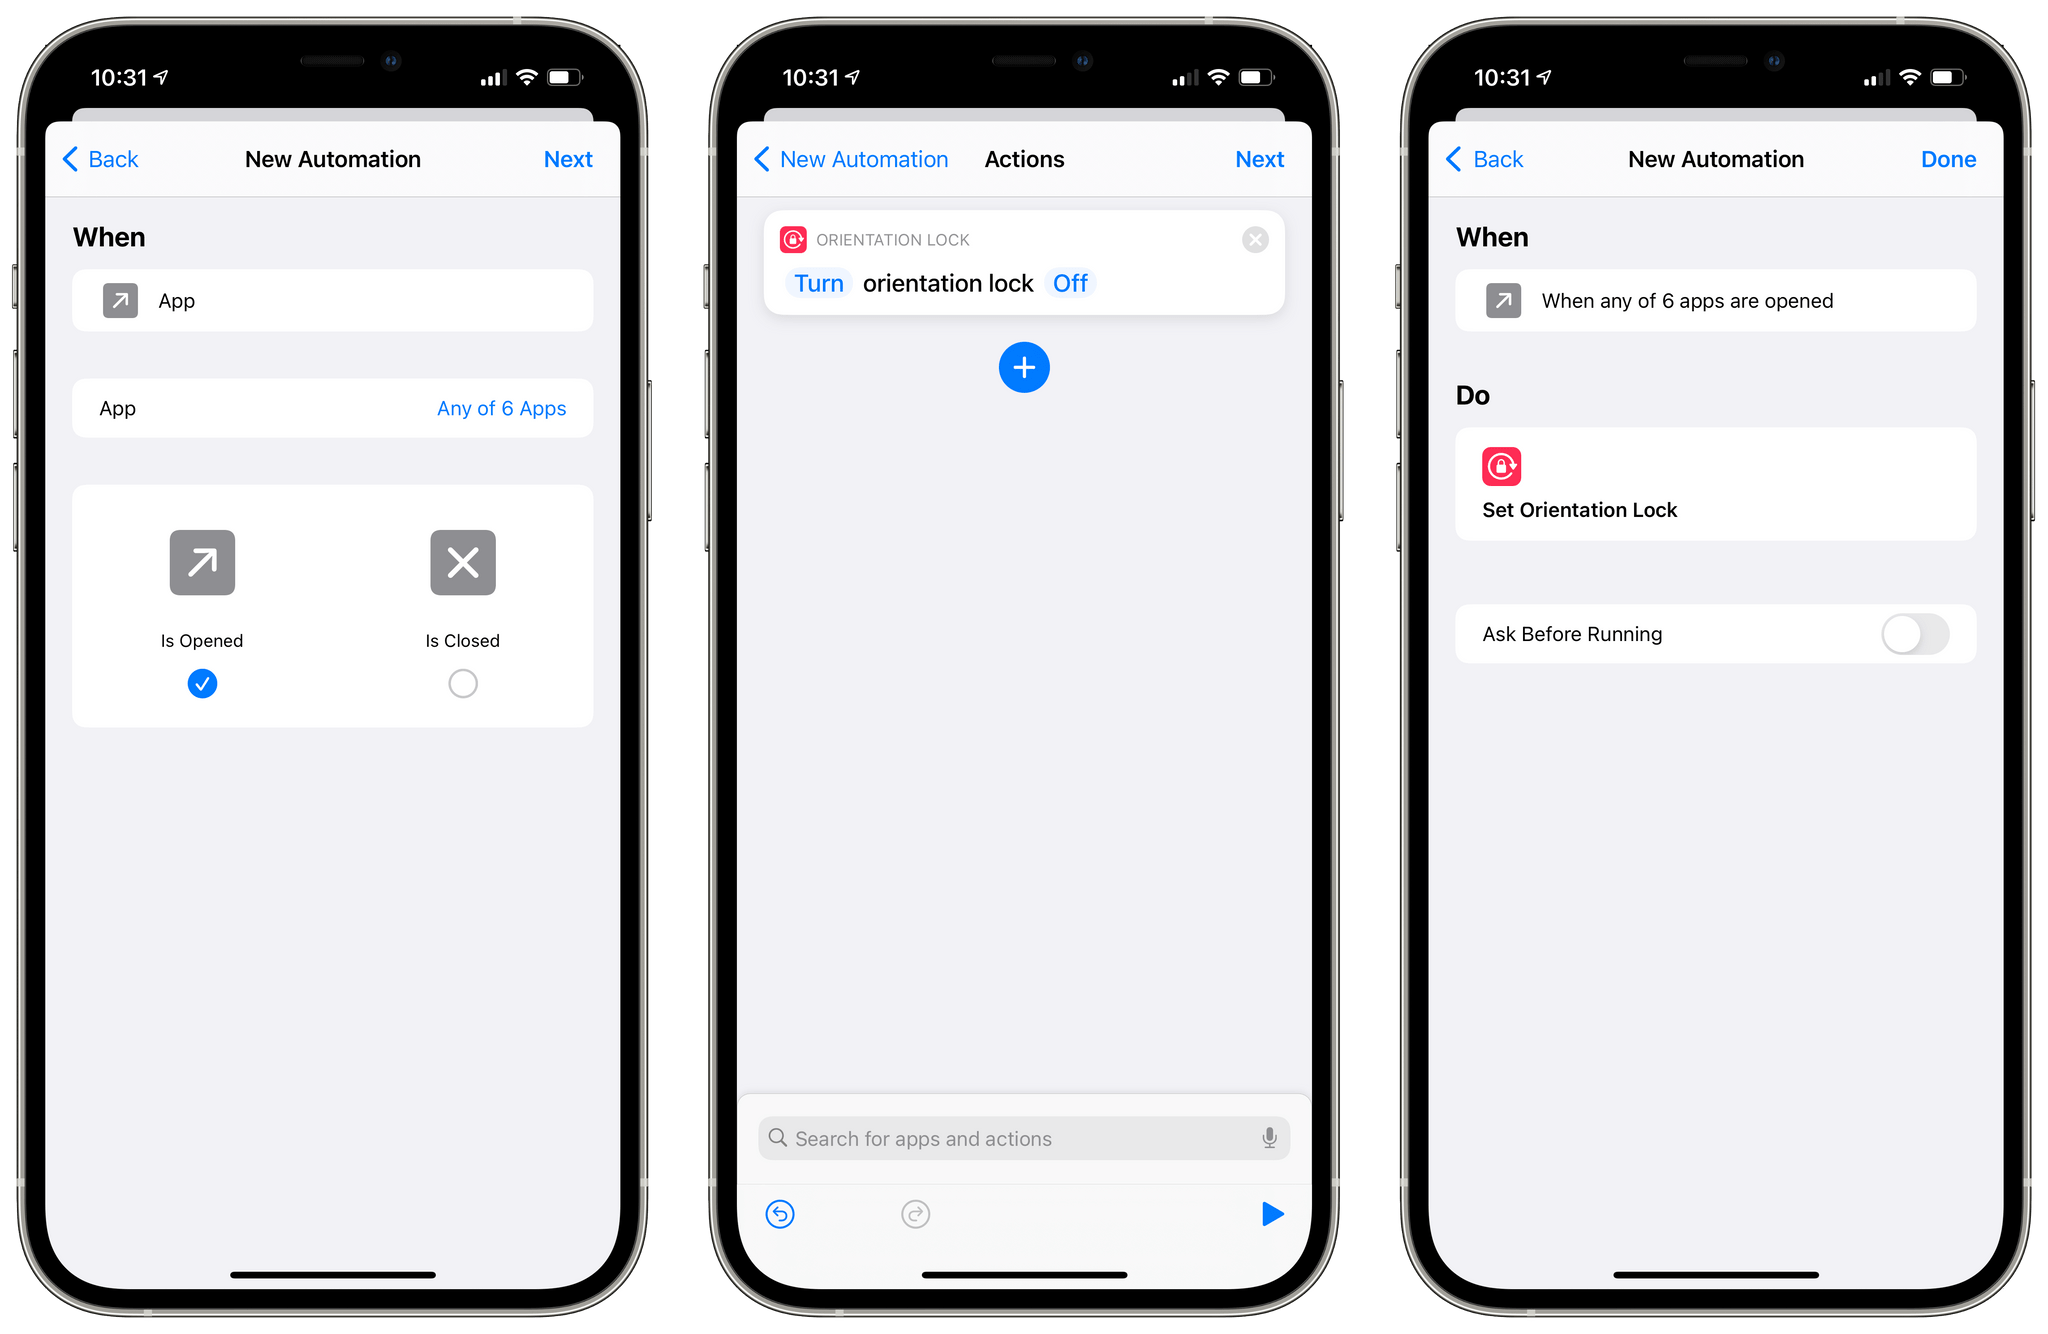 You can automate orientation lock based on which apps you open with Shortcuts in iOS 14.5.